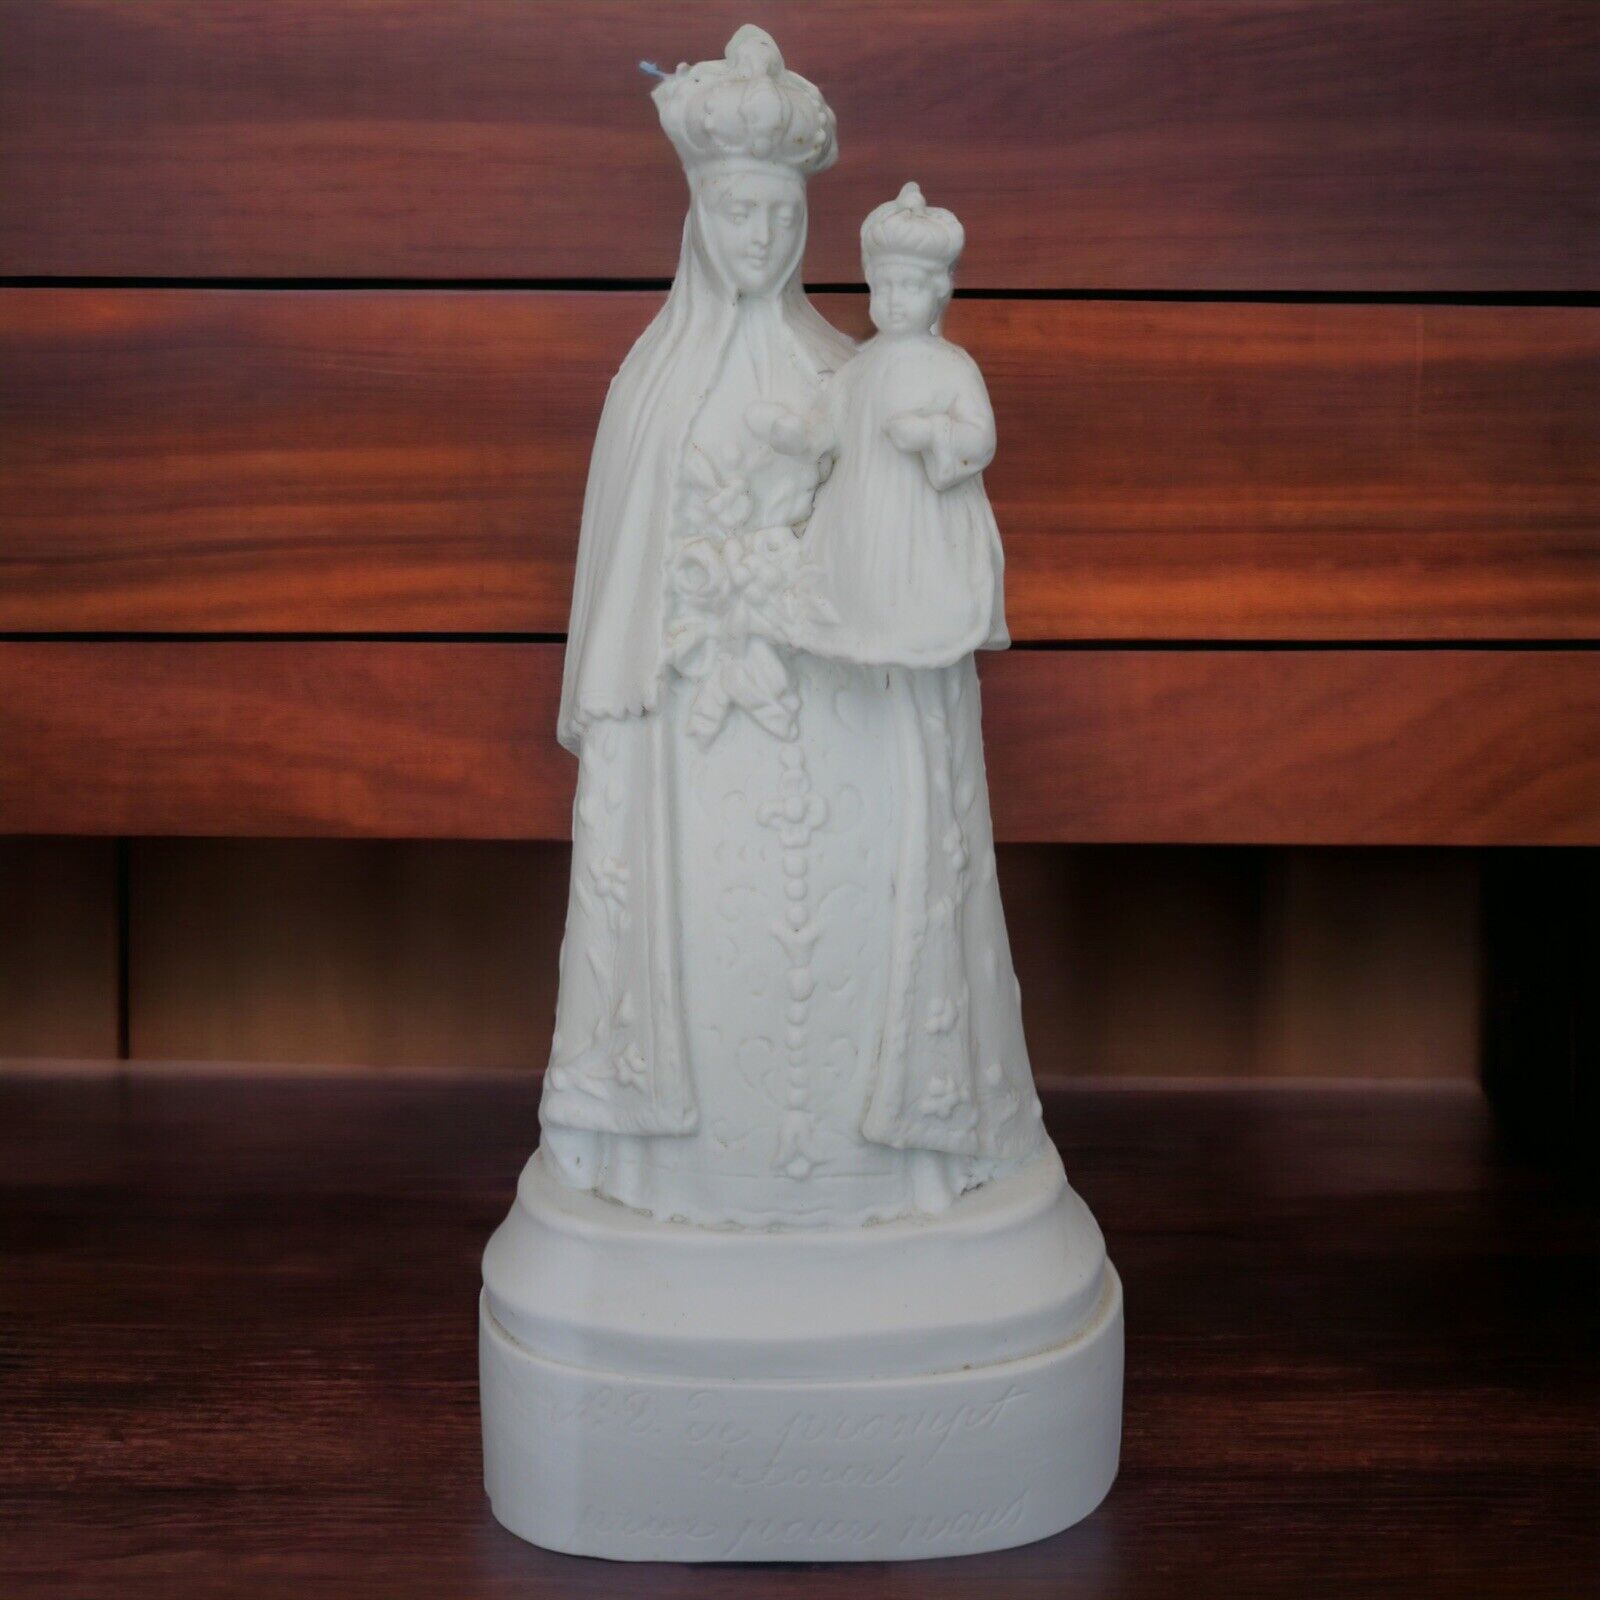 Late 19th Century French Parian Ware Bisque Madonna and Child Statuette